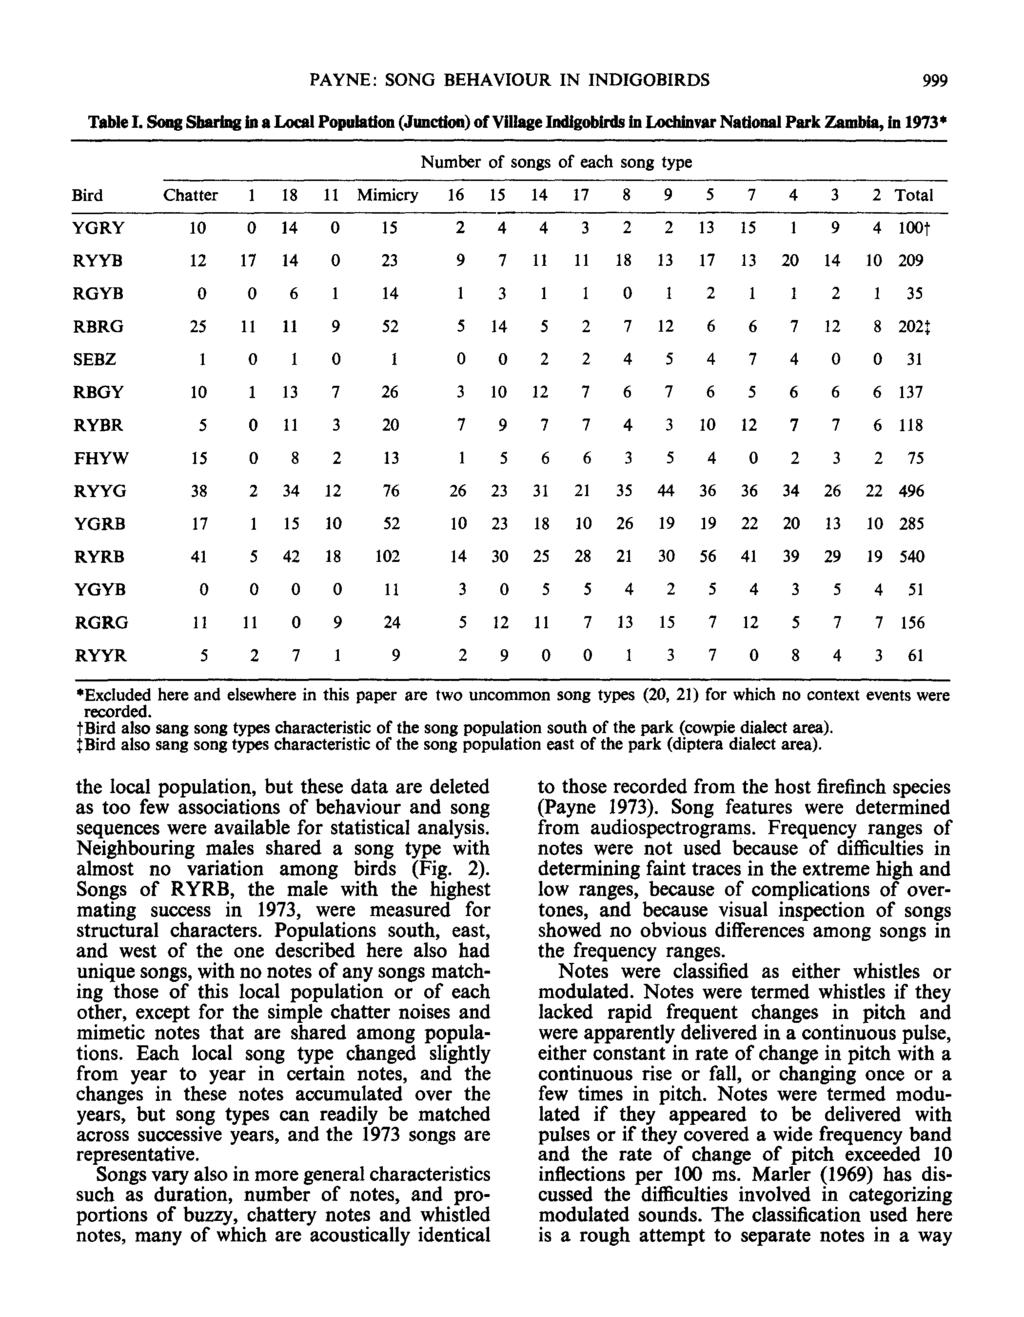 PAYNE : SNG BEHAVIUR IN INDIGBIRDS 999 Table L Song Sharing in a Local Population (Junction) of Village Indigobirds In Lochinvar National Park Zambia, in 1973* Number of songs of each song type Bird